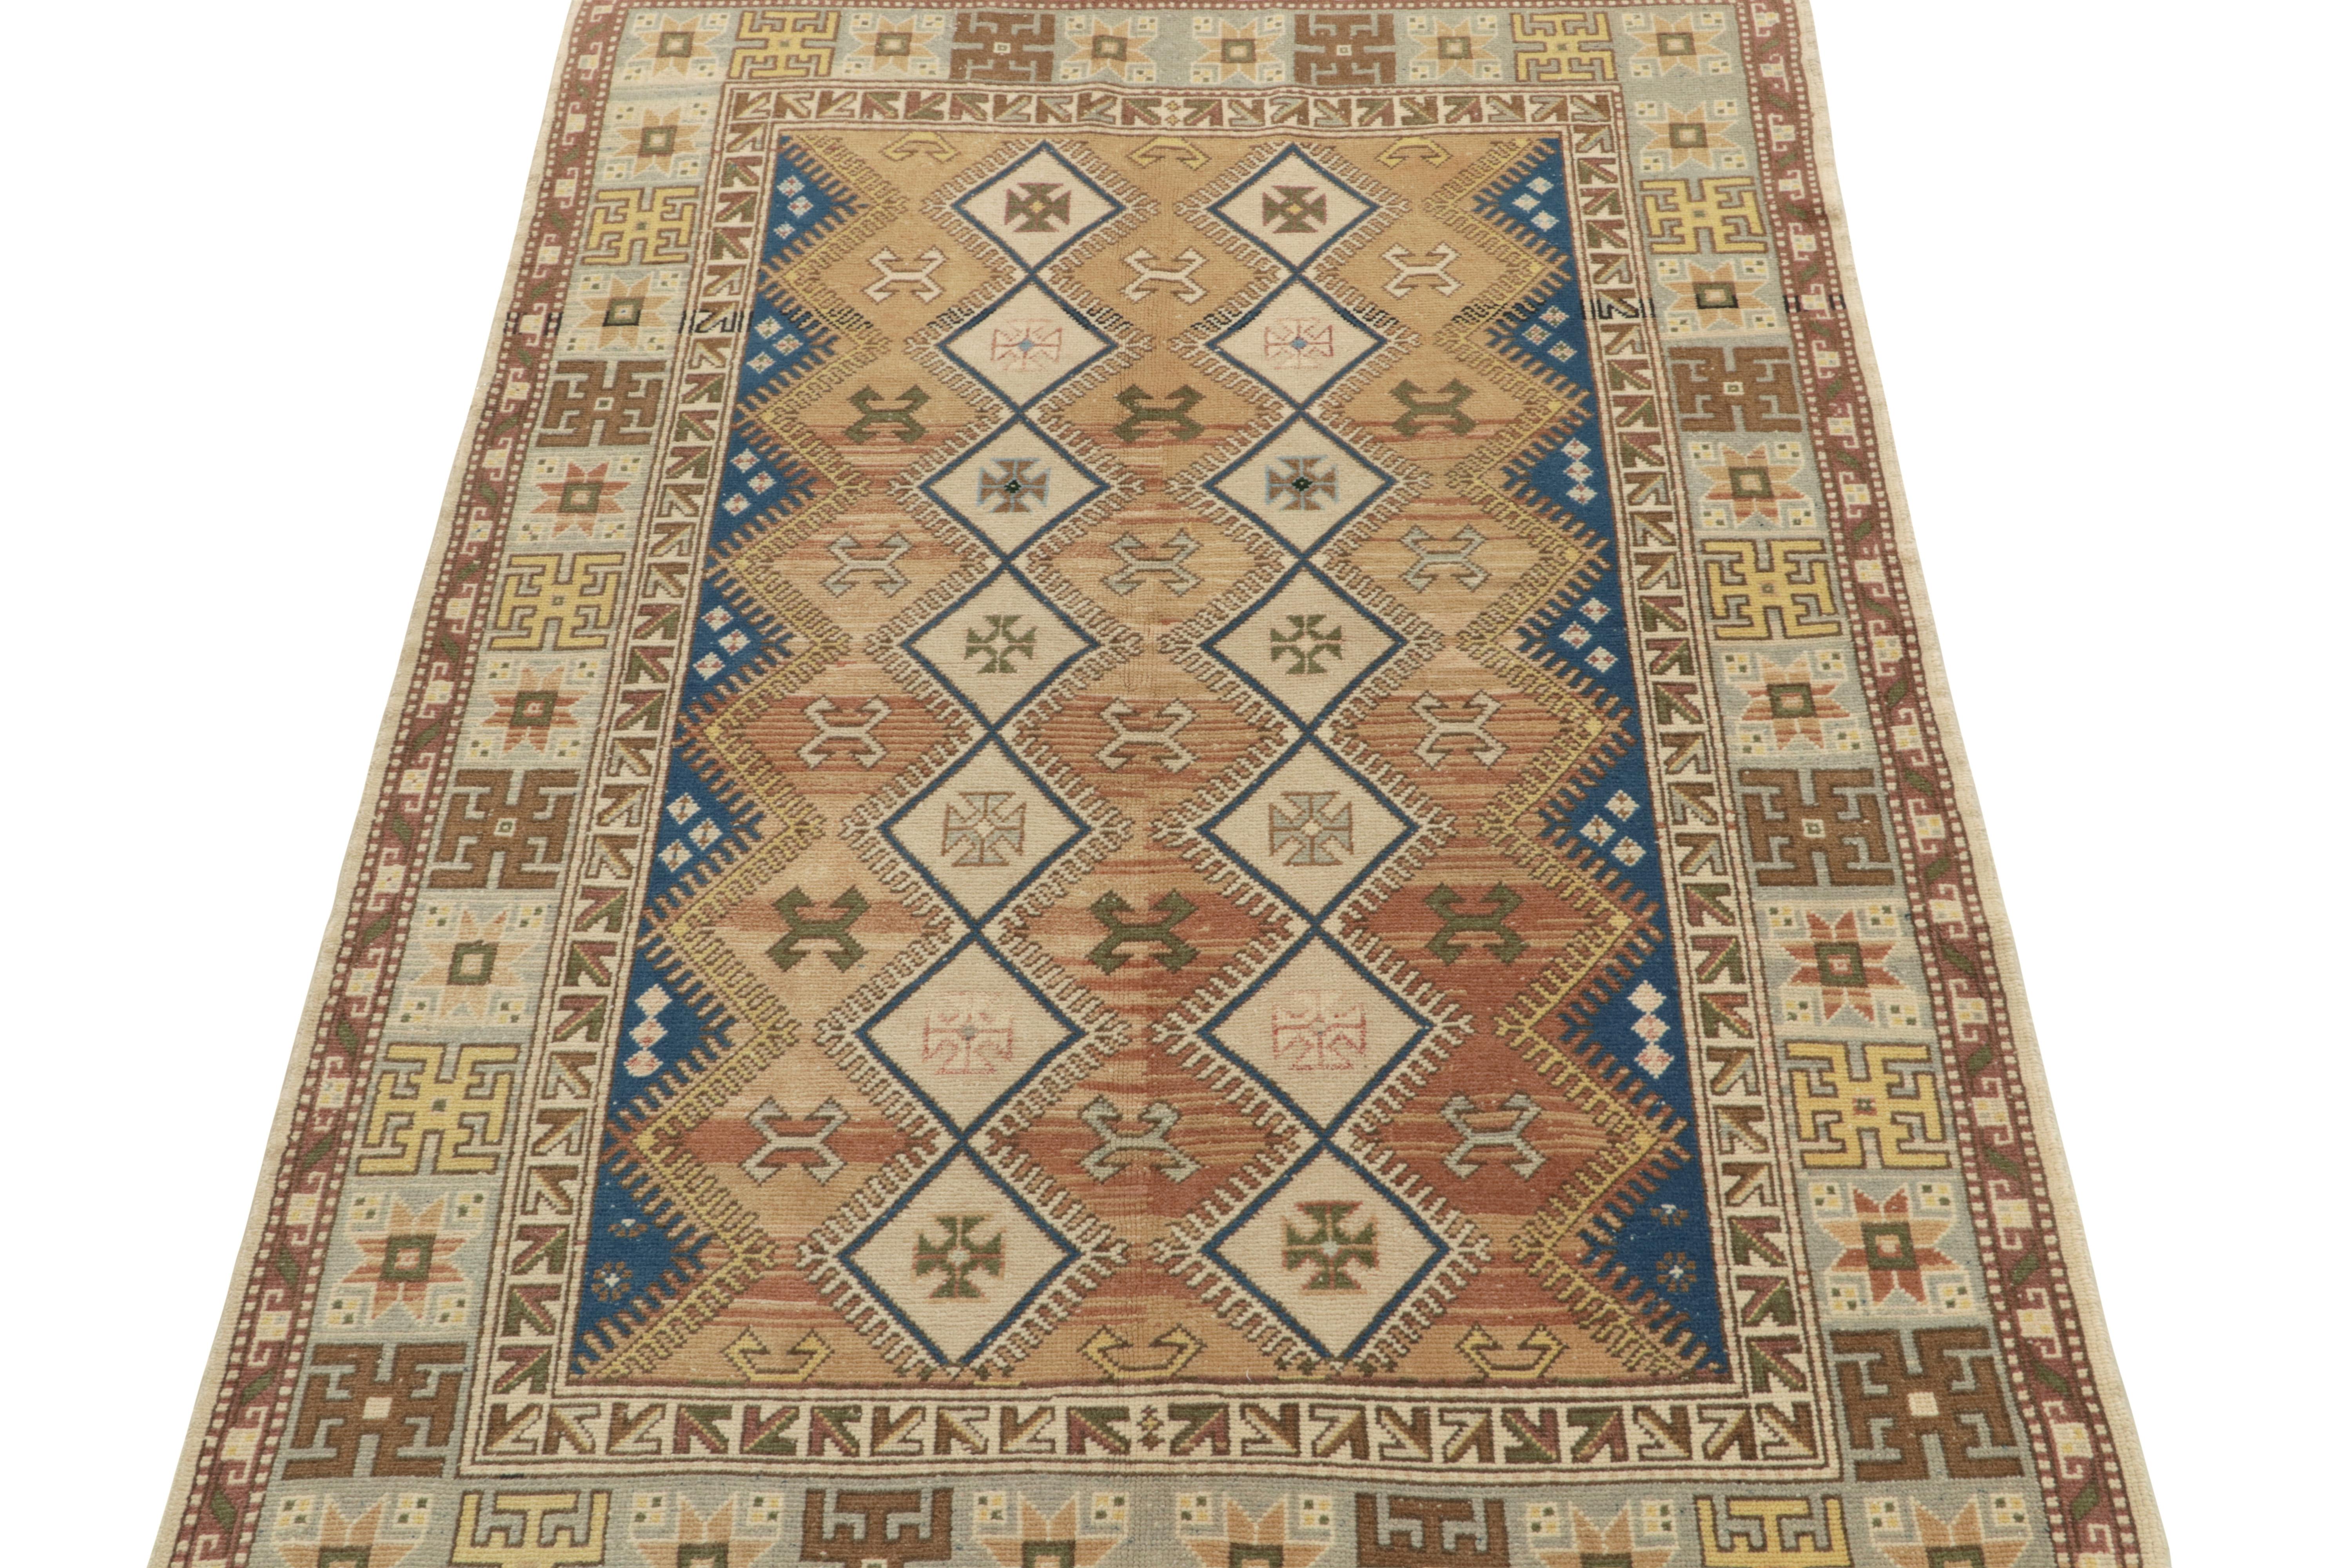 Originating from Turkey circa 1950-1960, a mid-century tribal rug now entering our Antique & Vintage selections. Characterized by fine detailing, the piece revels comfortably in bright blue, gold & beige marking a less-common approach to tribal